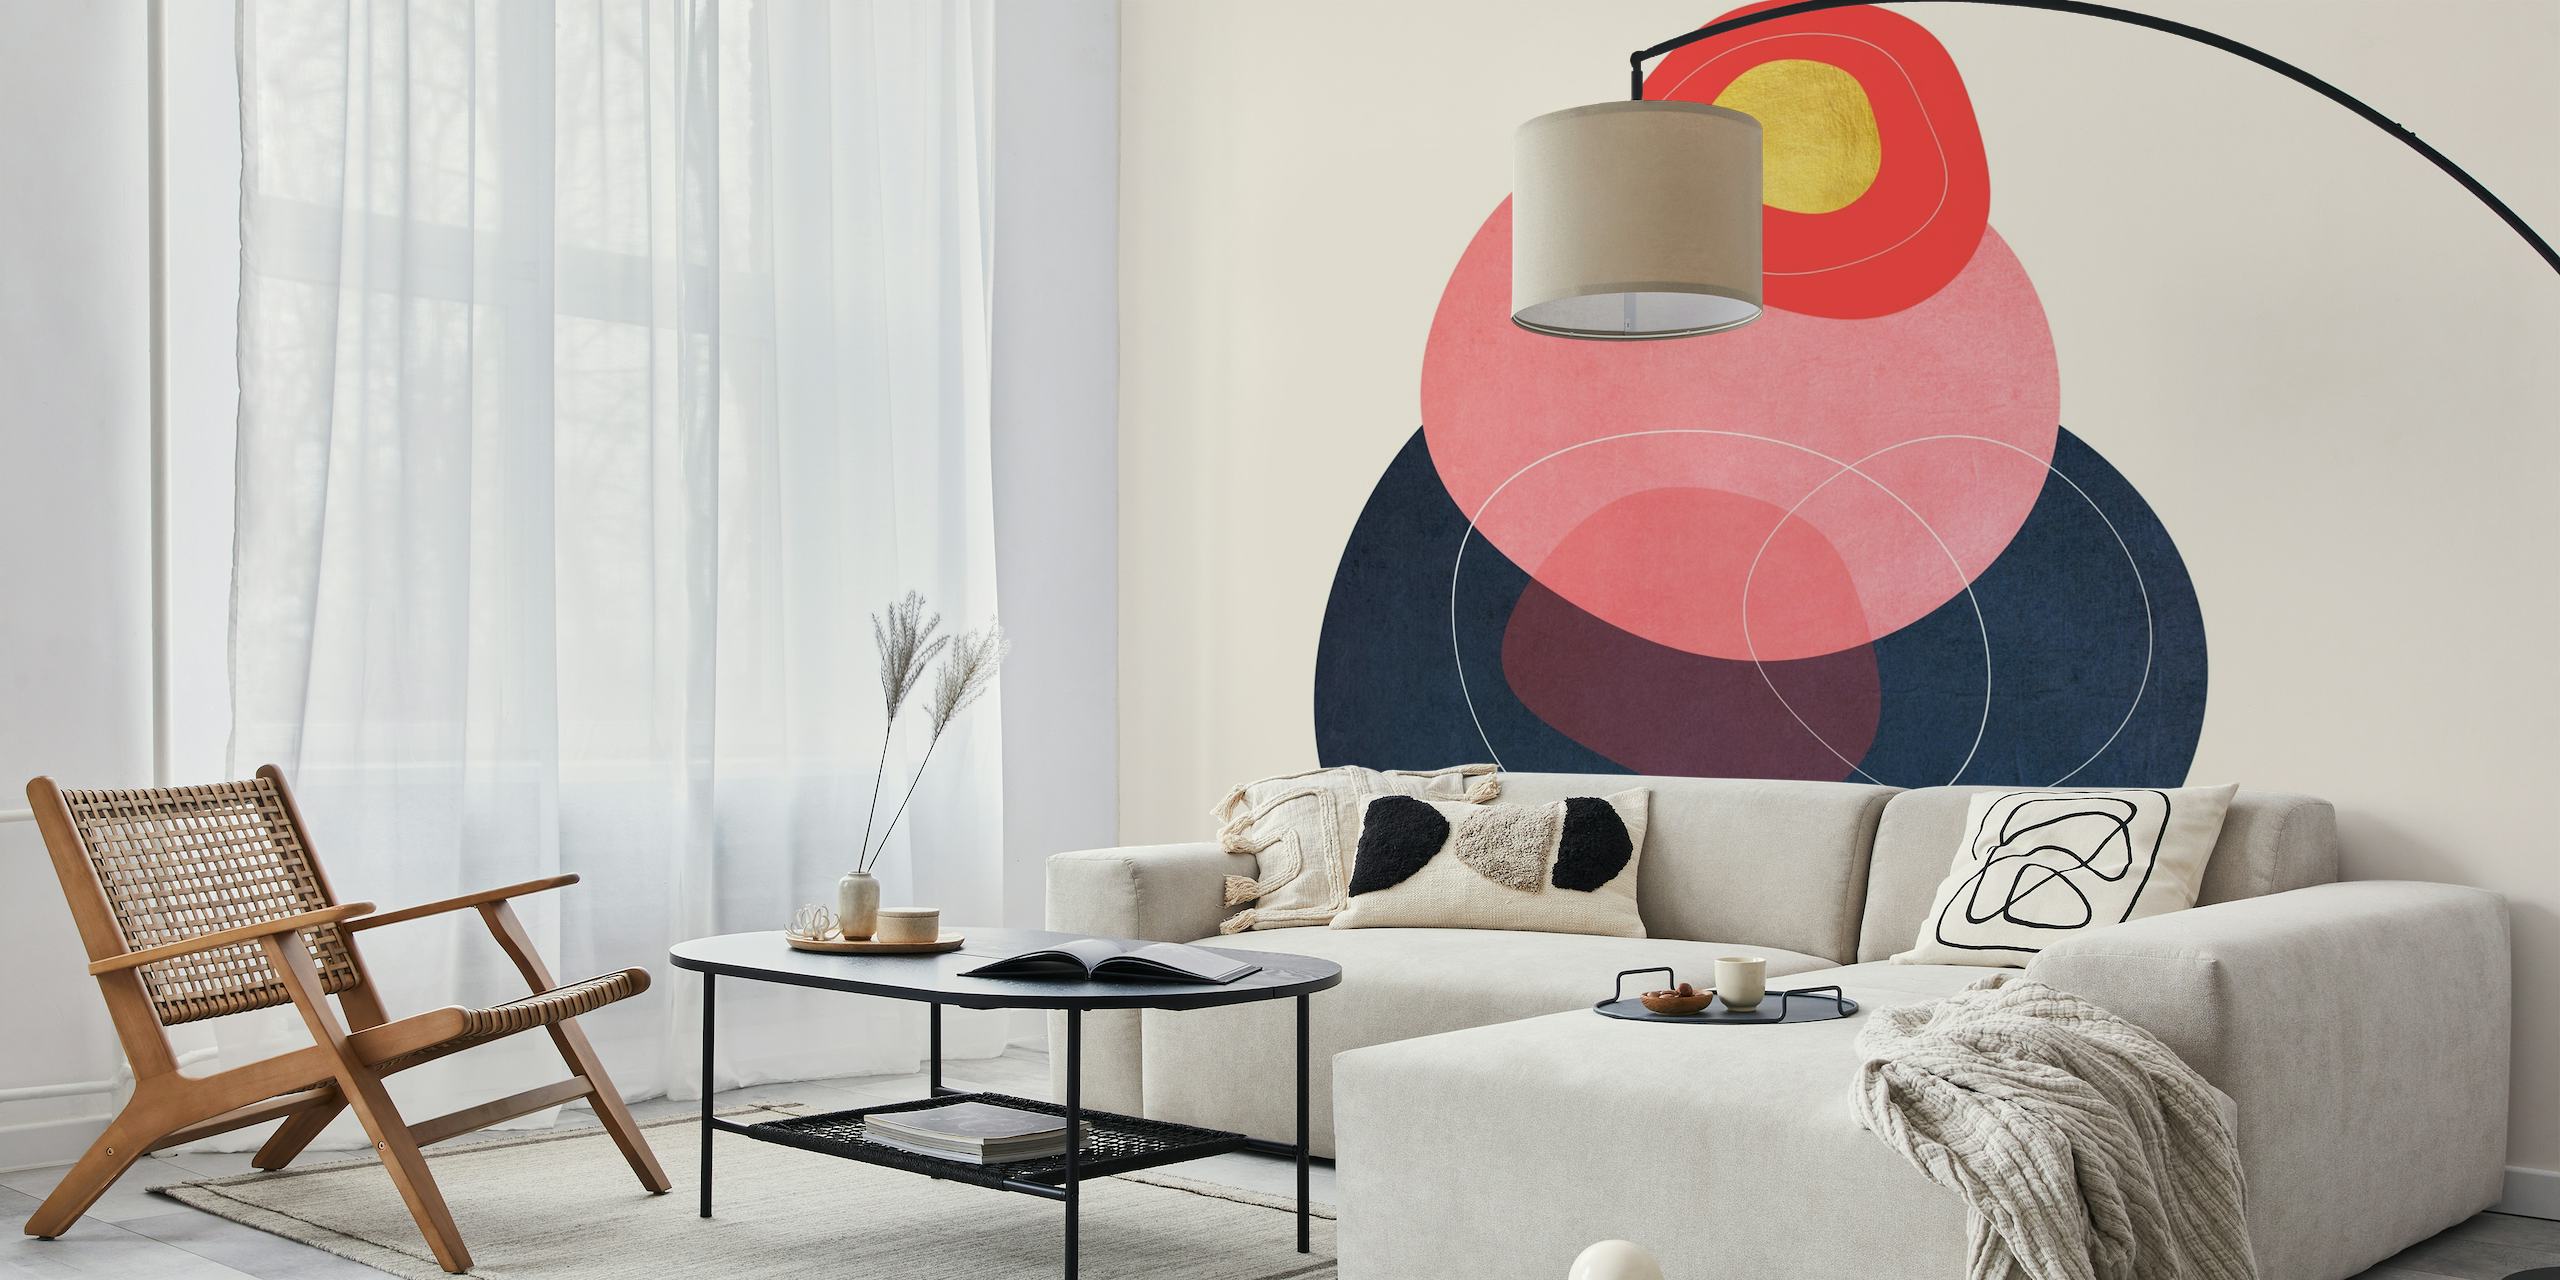 Modern Minimal Forms 27 wall mural featuring abstract geometric shapes in pastel tones